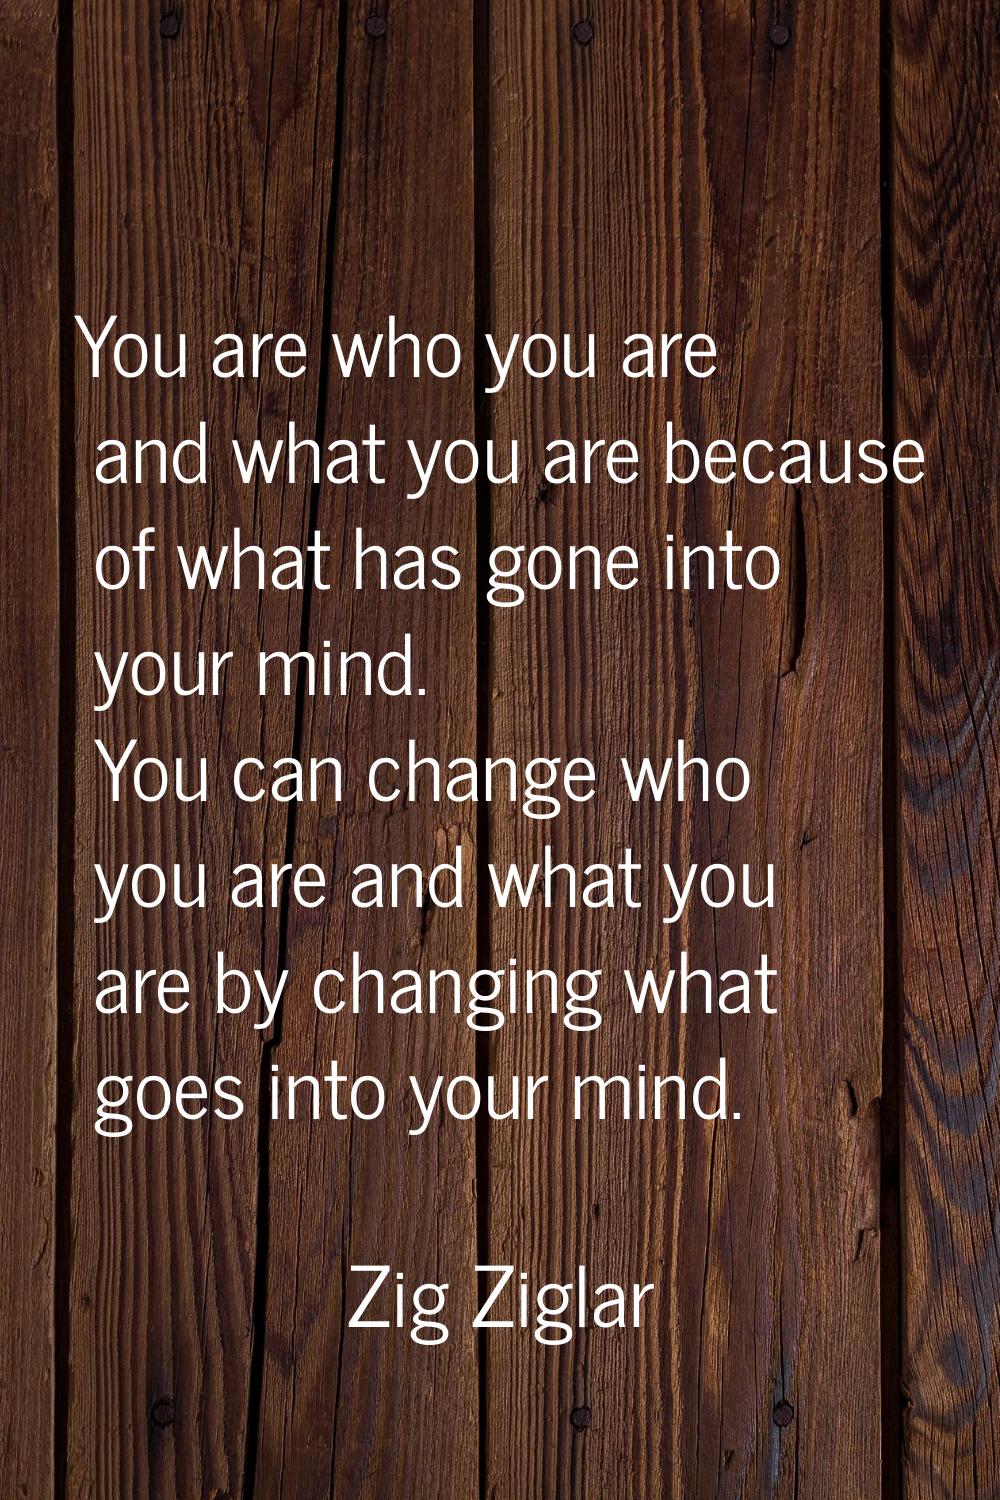 You are who you are and what you are because of what has gone into your mind. You can change who yo